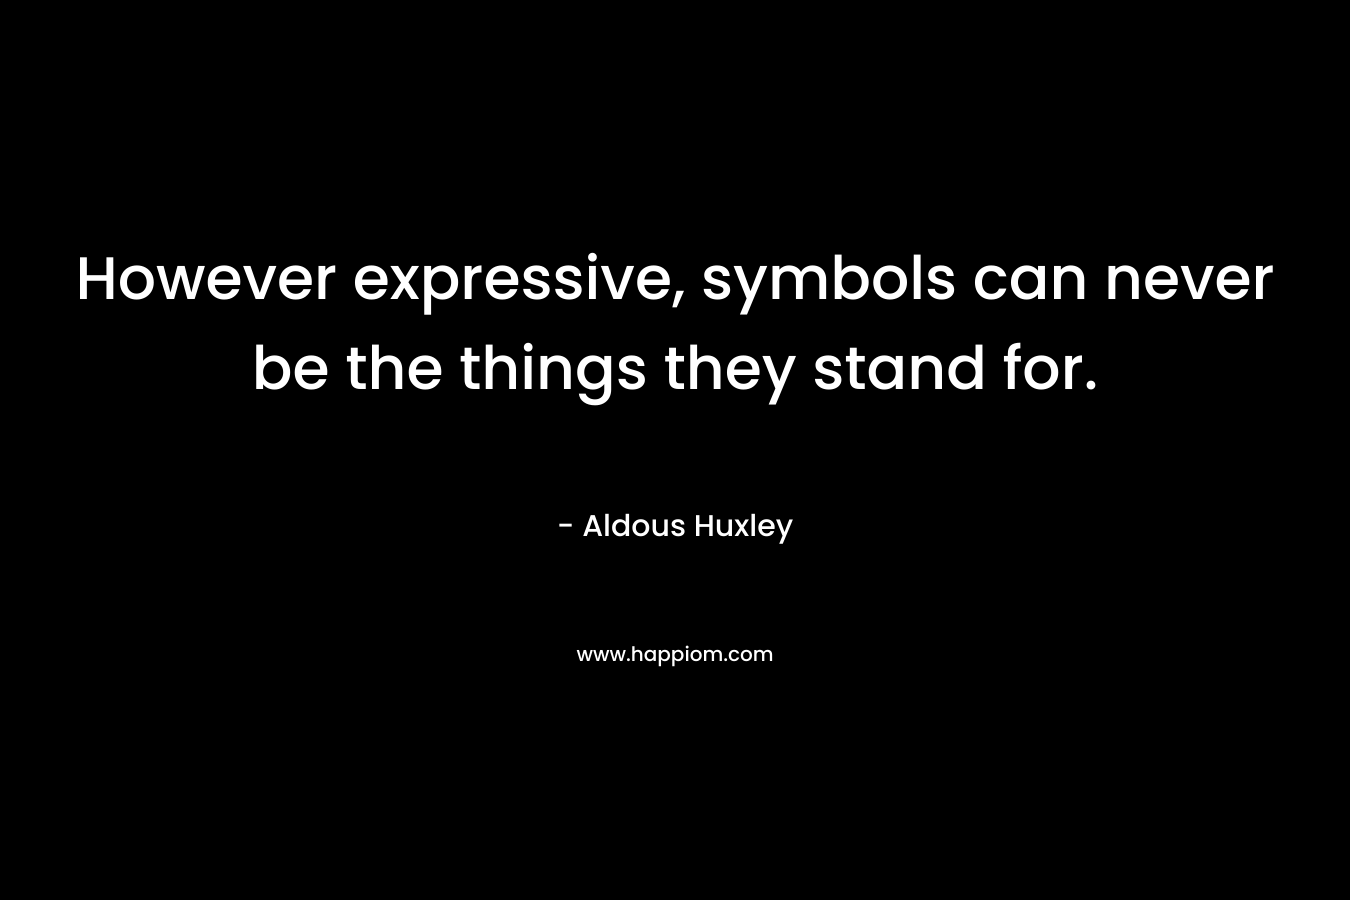 However expressive, symbols can never be the things they stand for. – Aldous Huxley